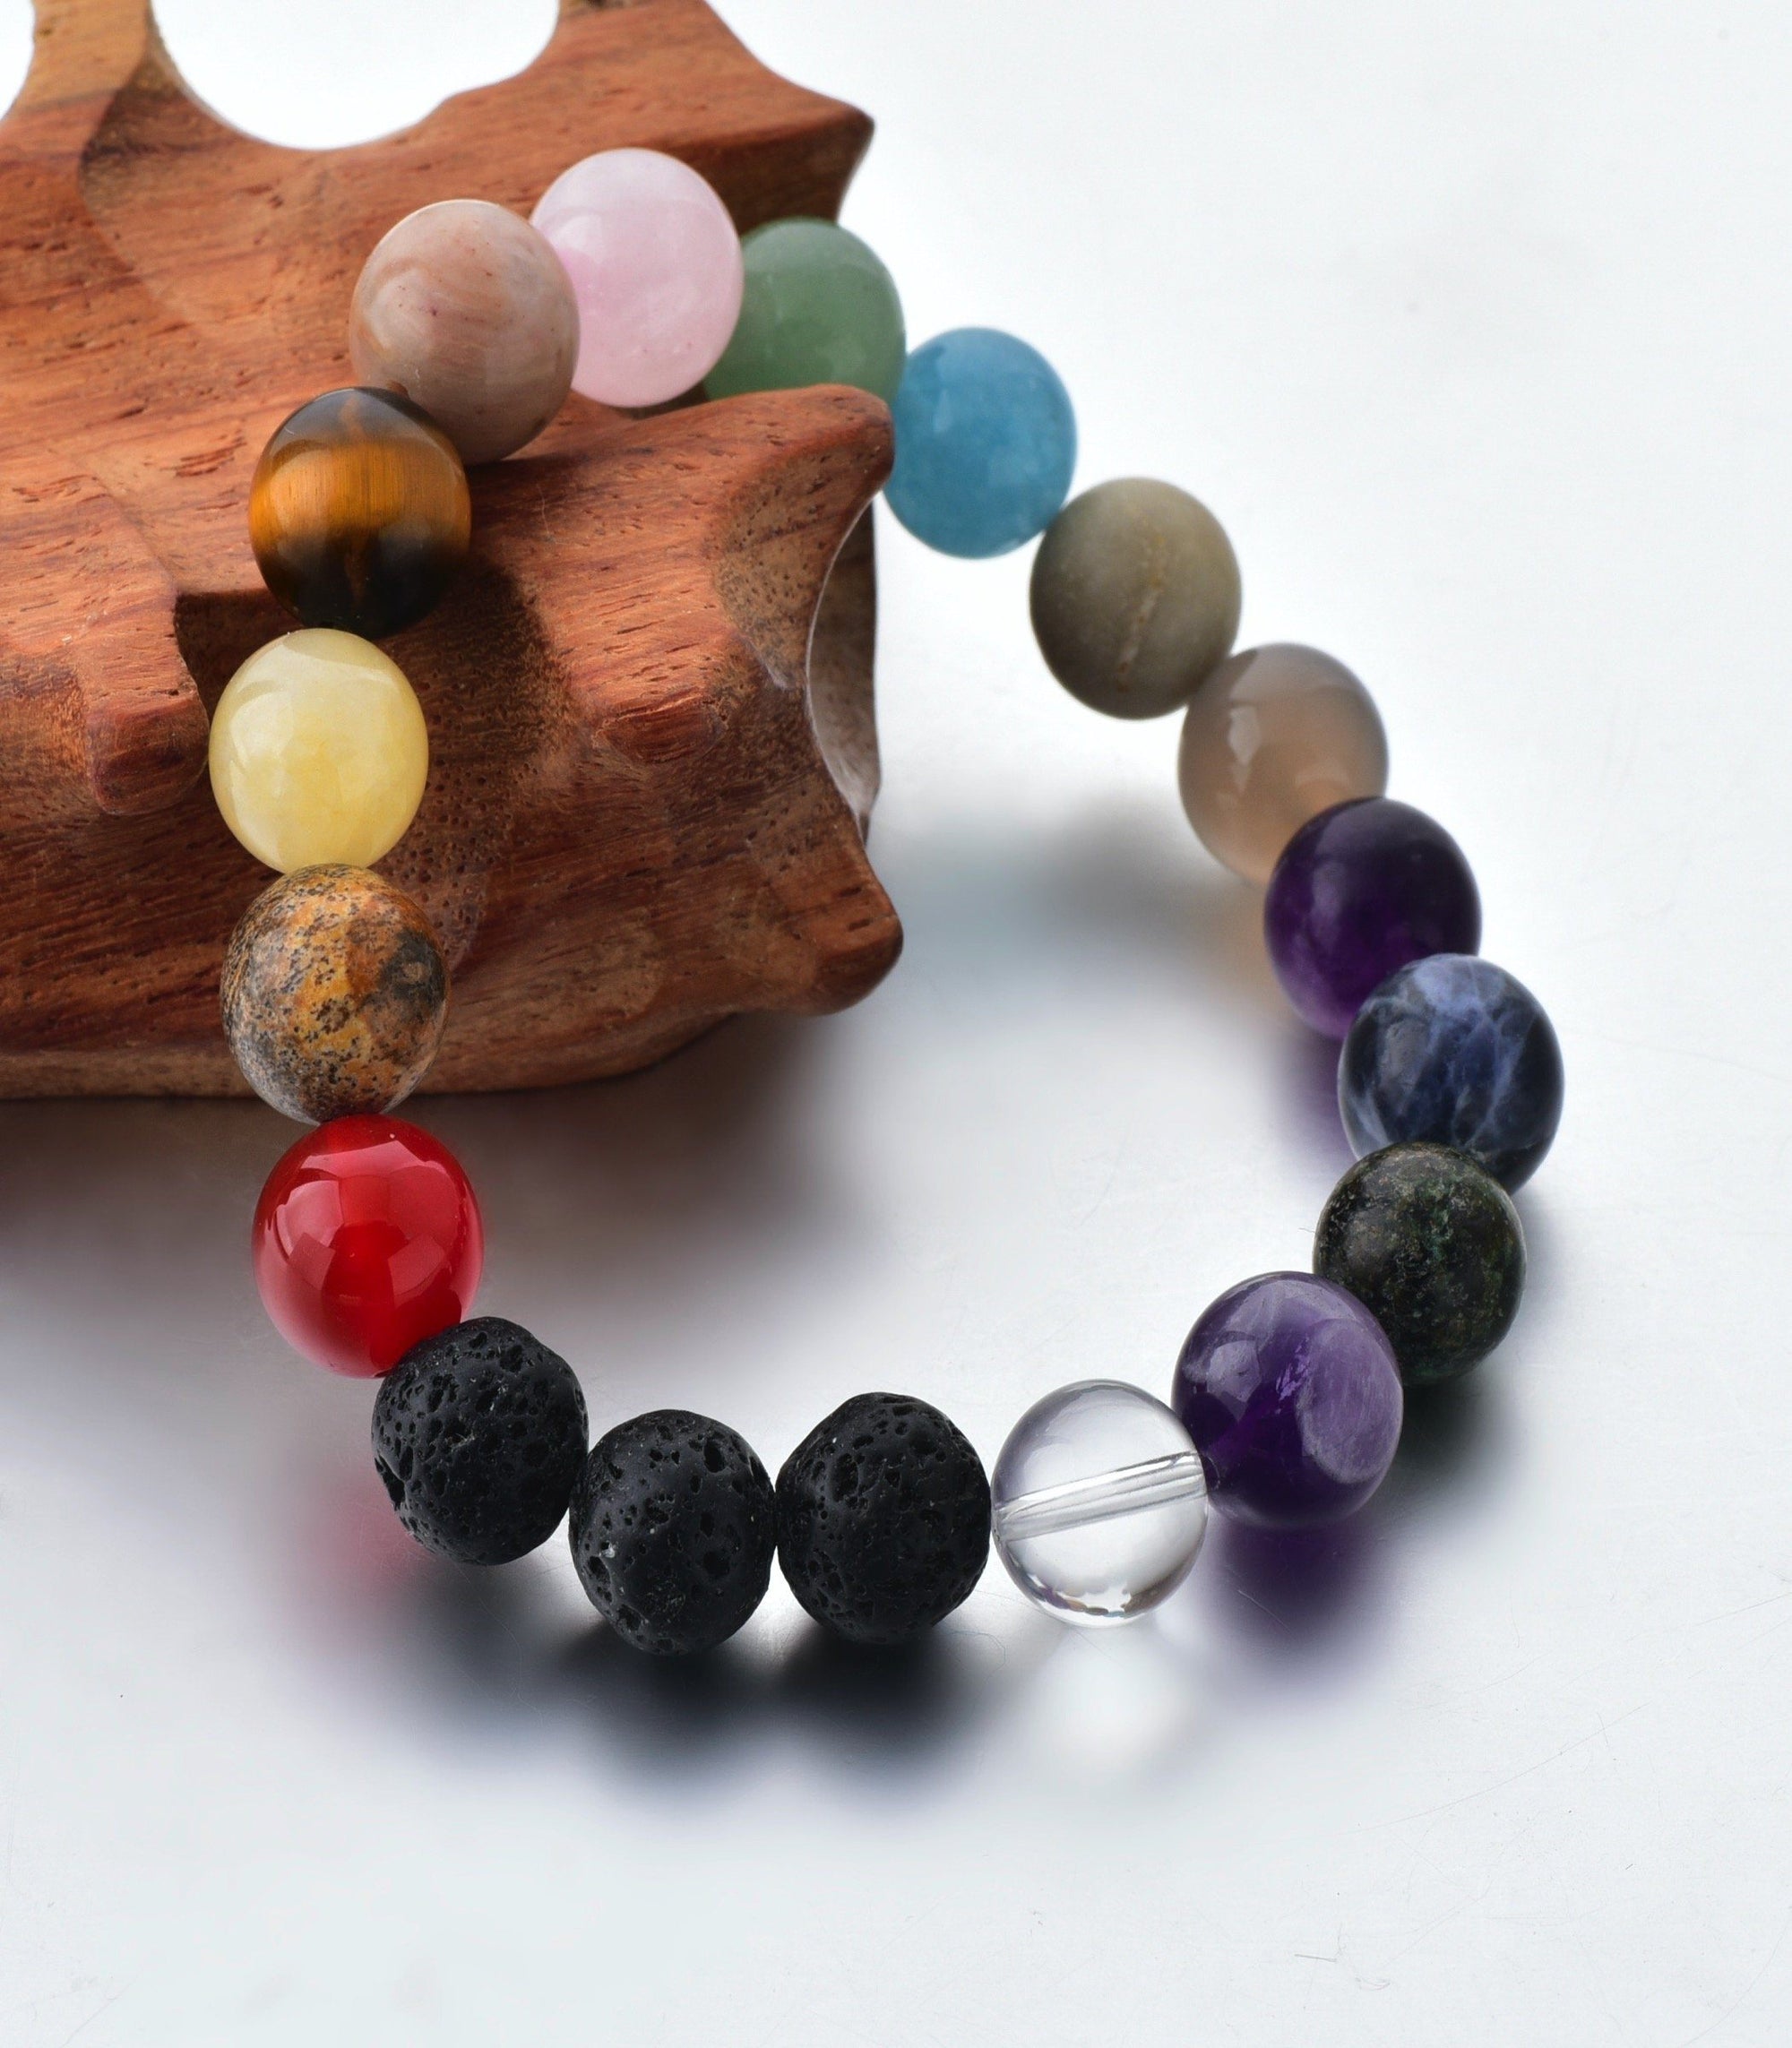 Soul Stone Diffuser Bracelet - All In One Crystal